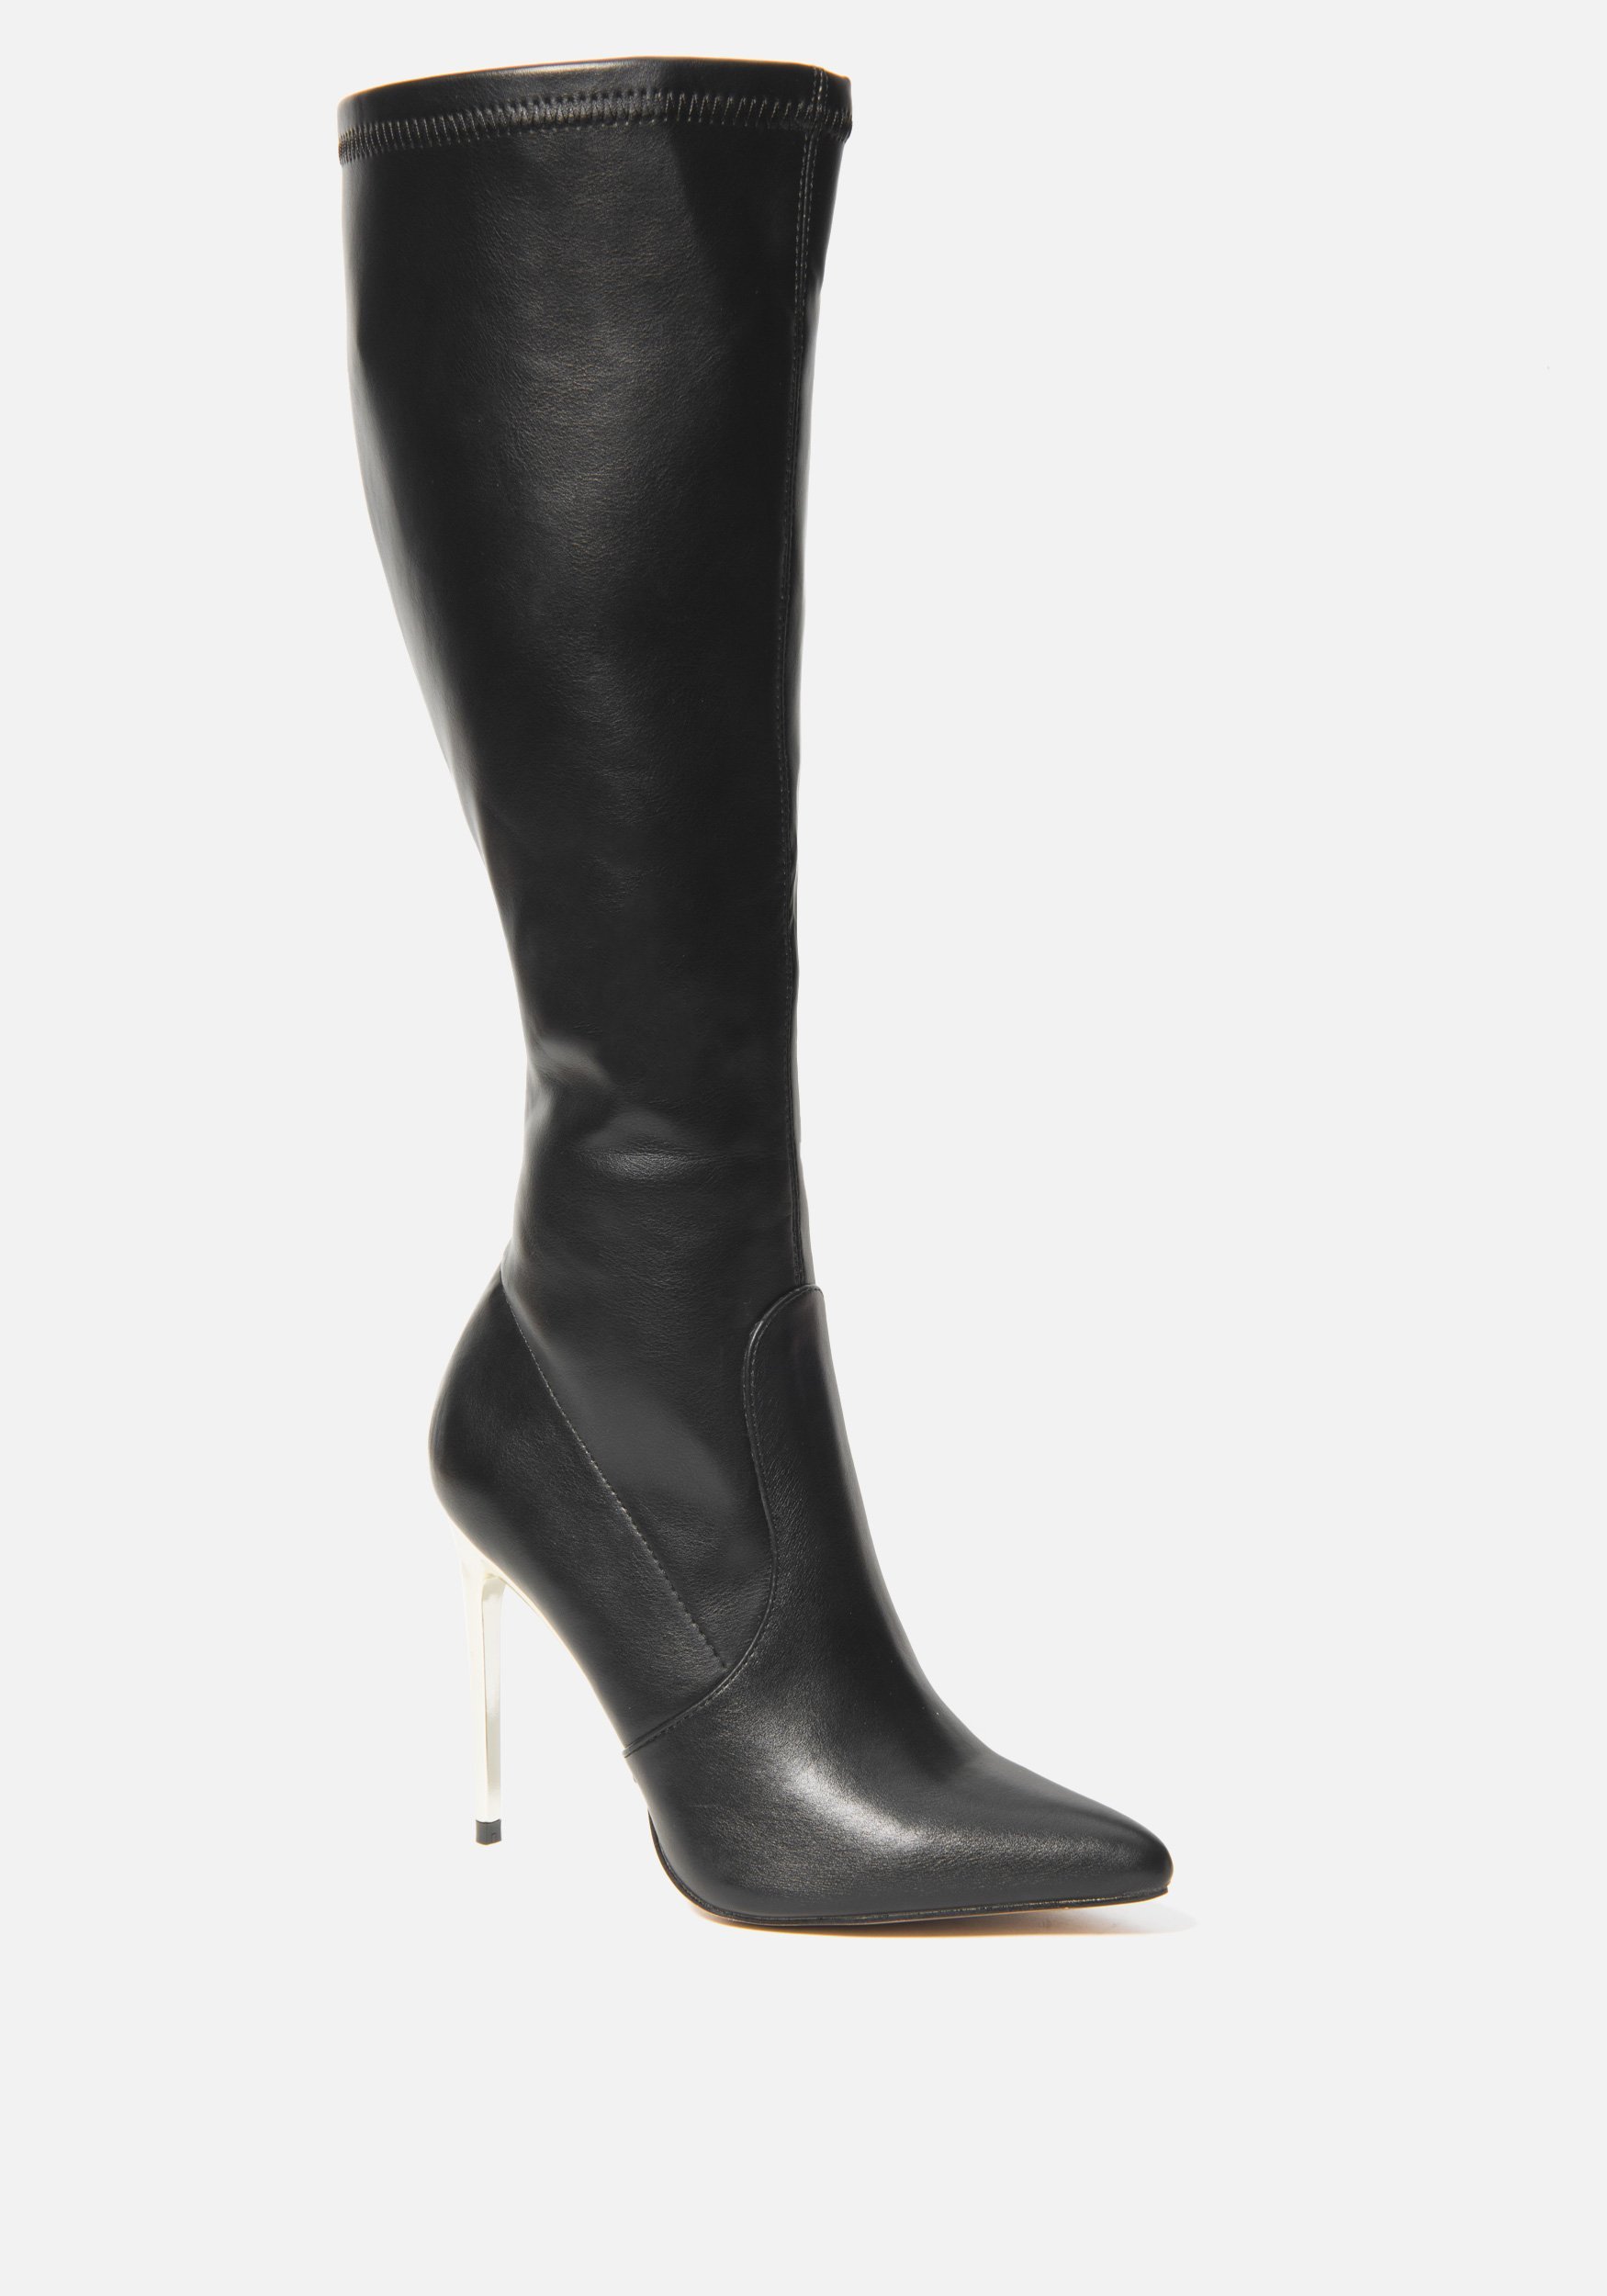 Bebe Women's Valeria Knee High Boots, Size 6 in BLACK Synthetic